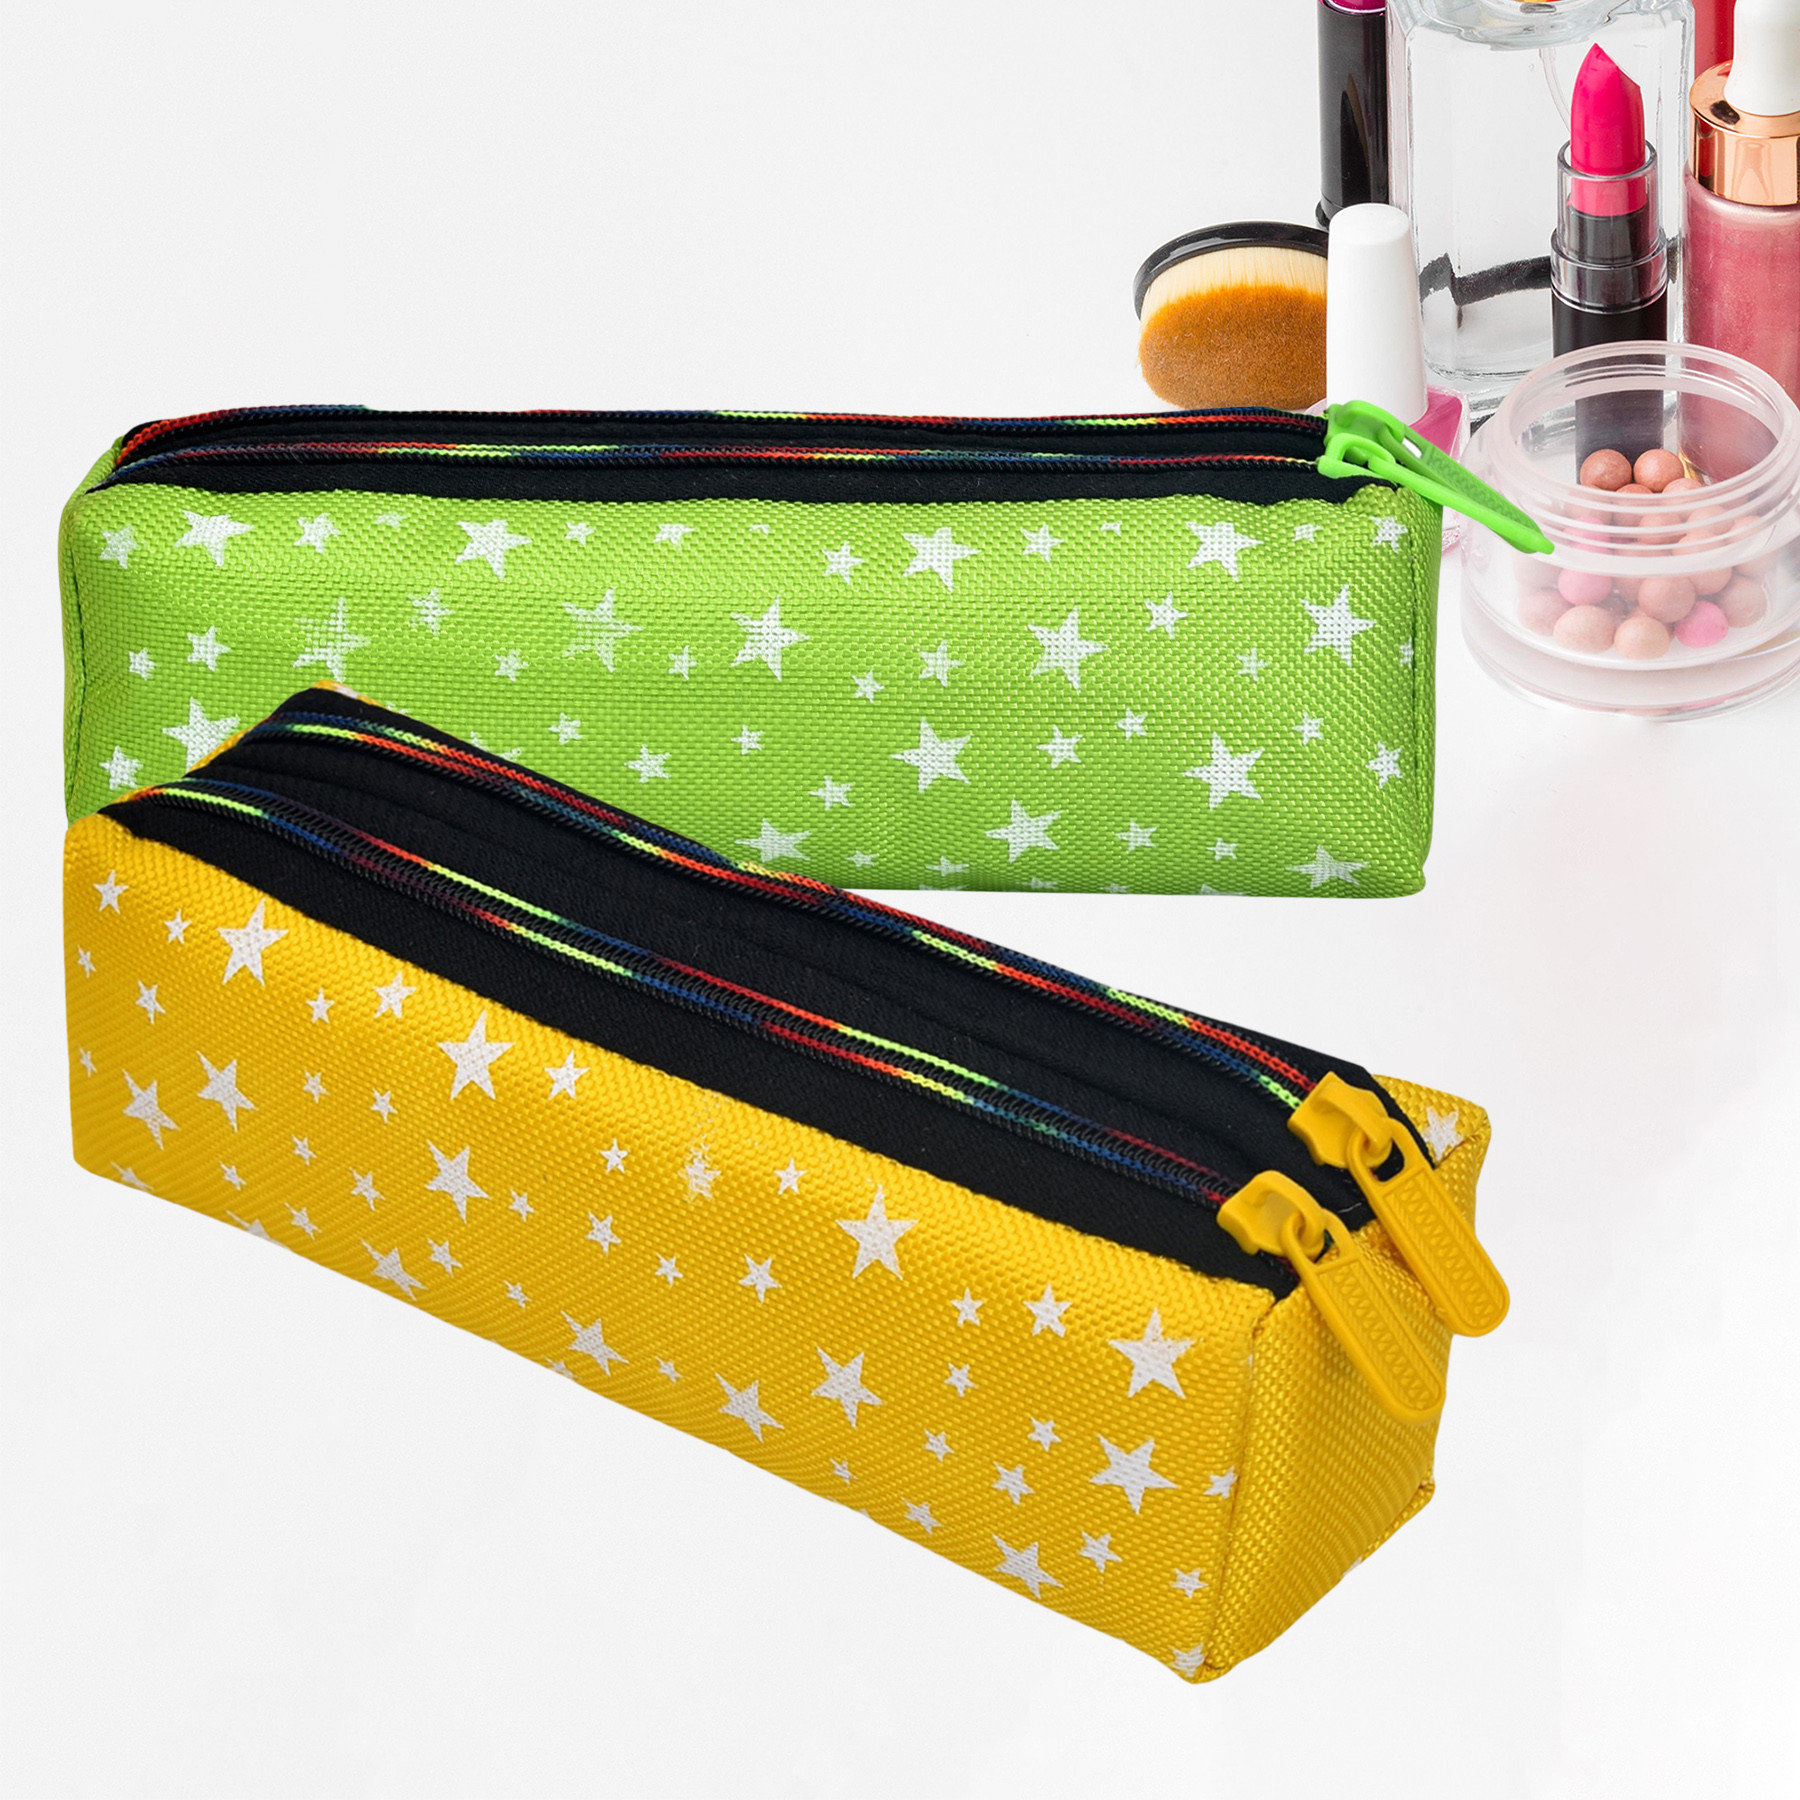 Kuber Industries Makeup Pouch | Rexine Cosmetic Pouch | Jewellery Utility Pouch | Toiletry Pouch for Girls | Travel Makeup Pouch for Girls | Storage Makeup Bag | Star Makeup Pouch | Pack of 2 | Multi